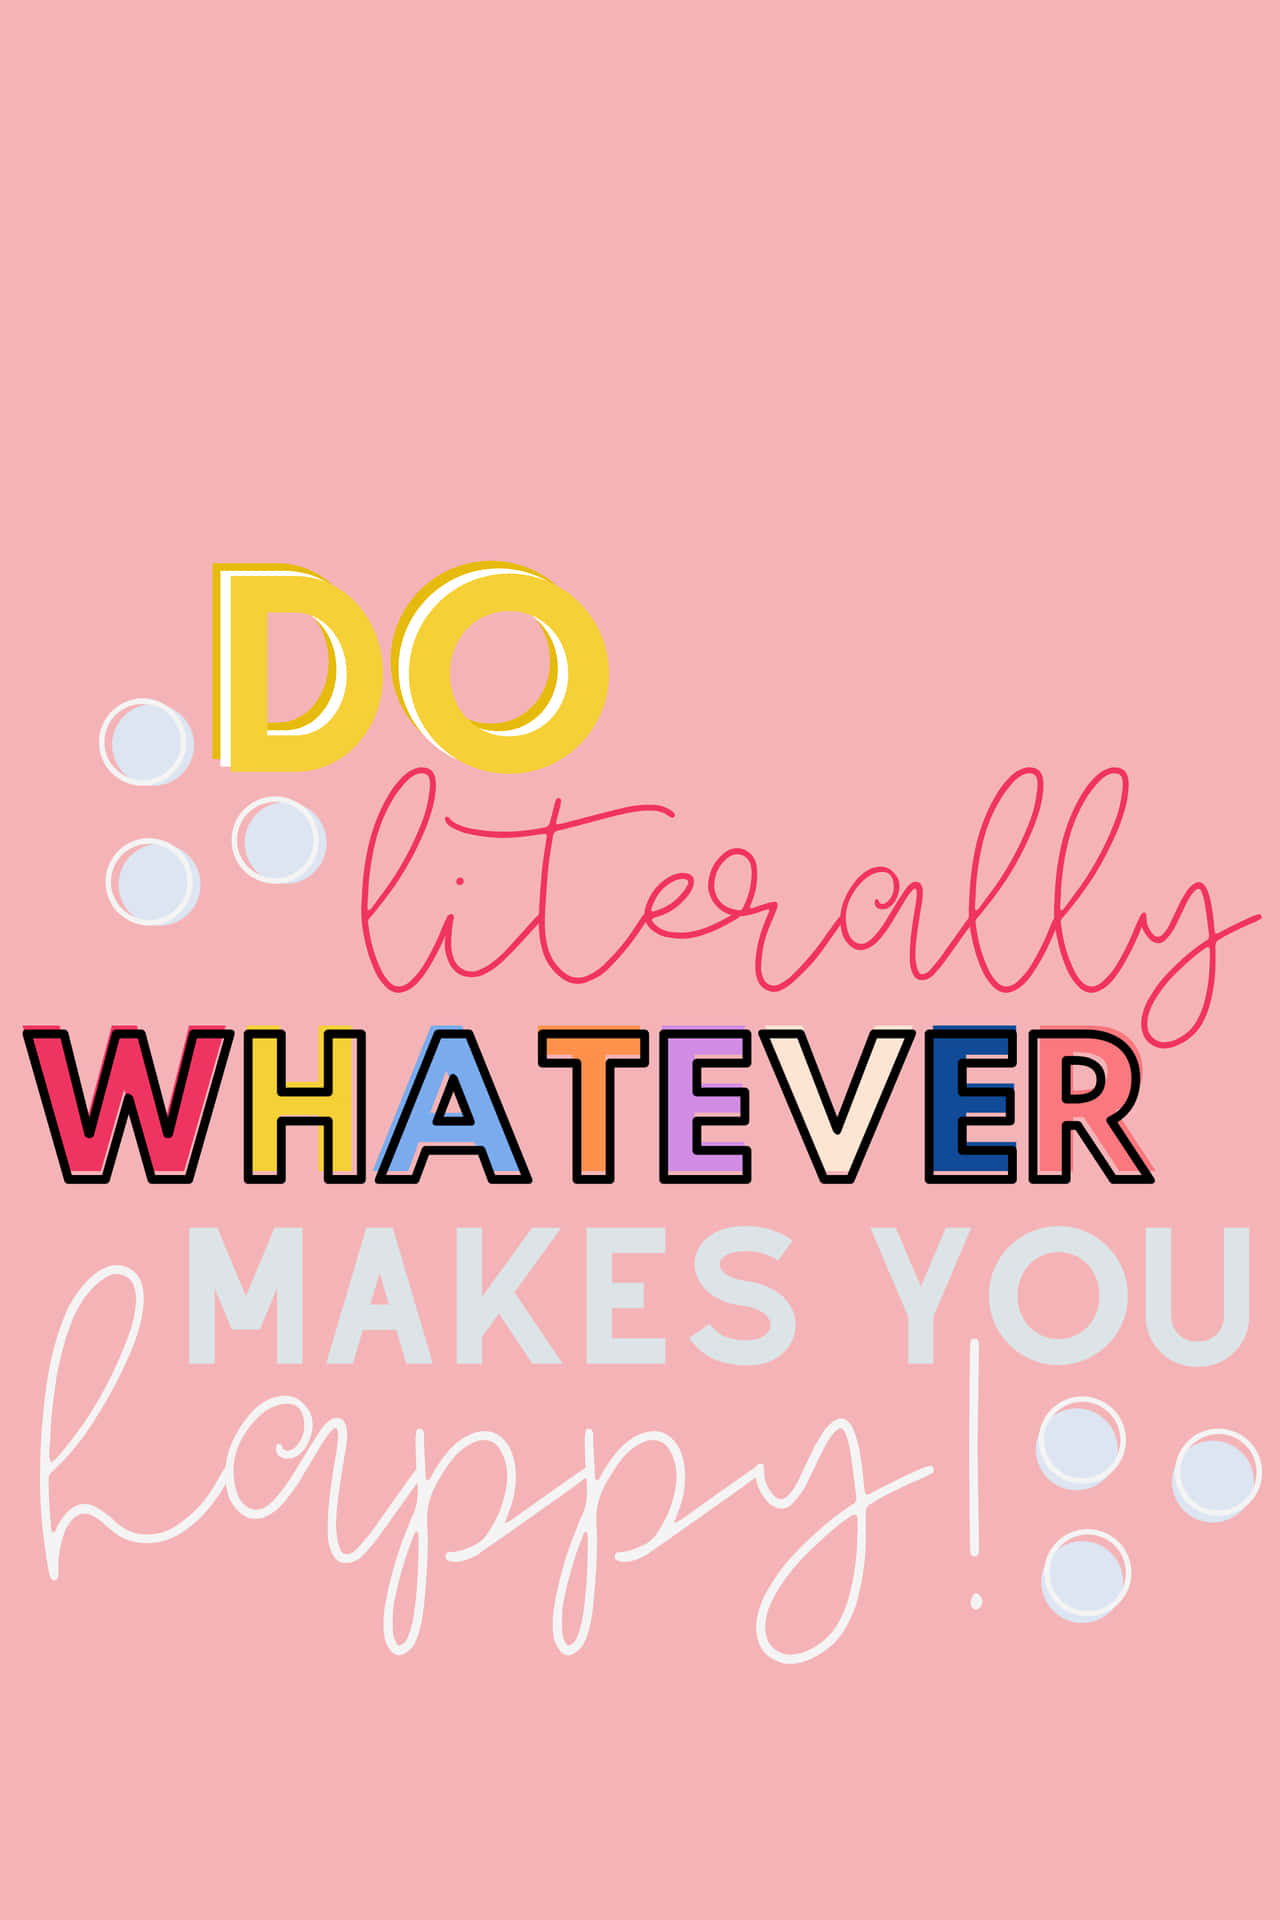 "Make Your Own Happiness" Wallpaper